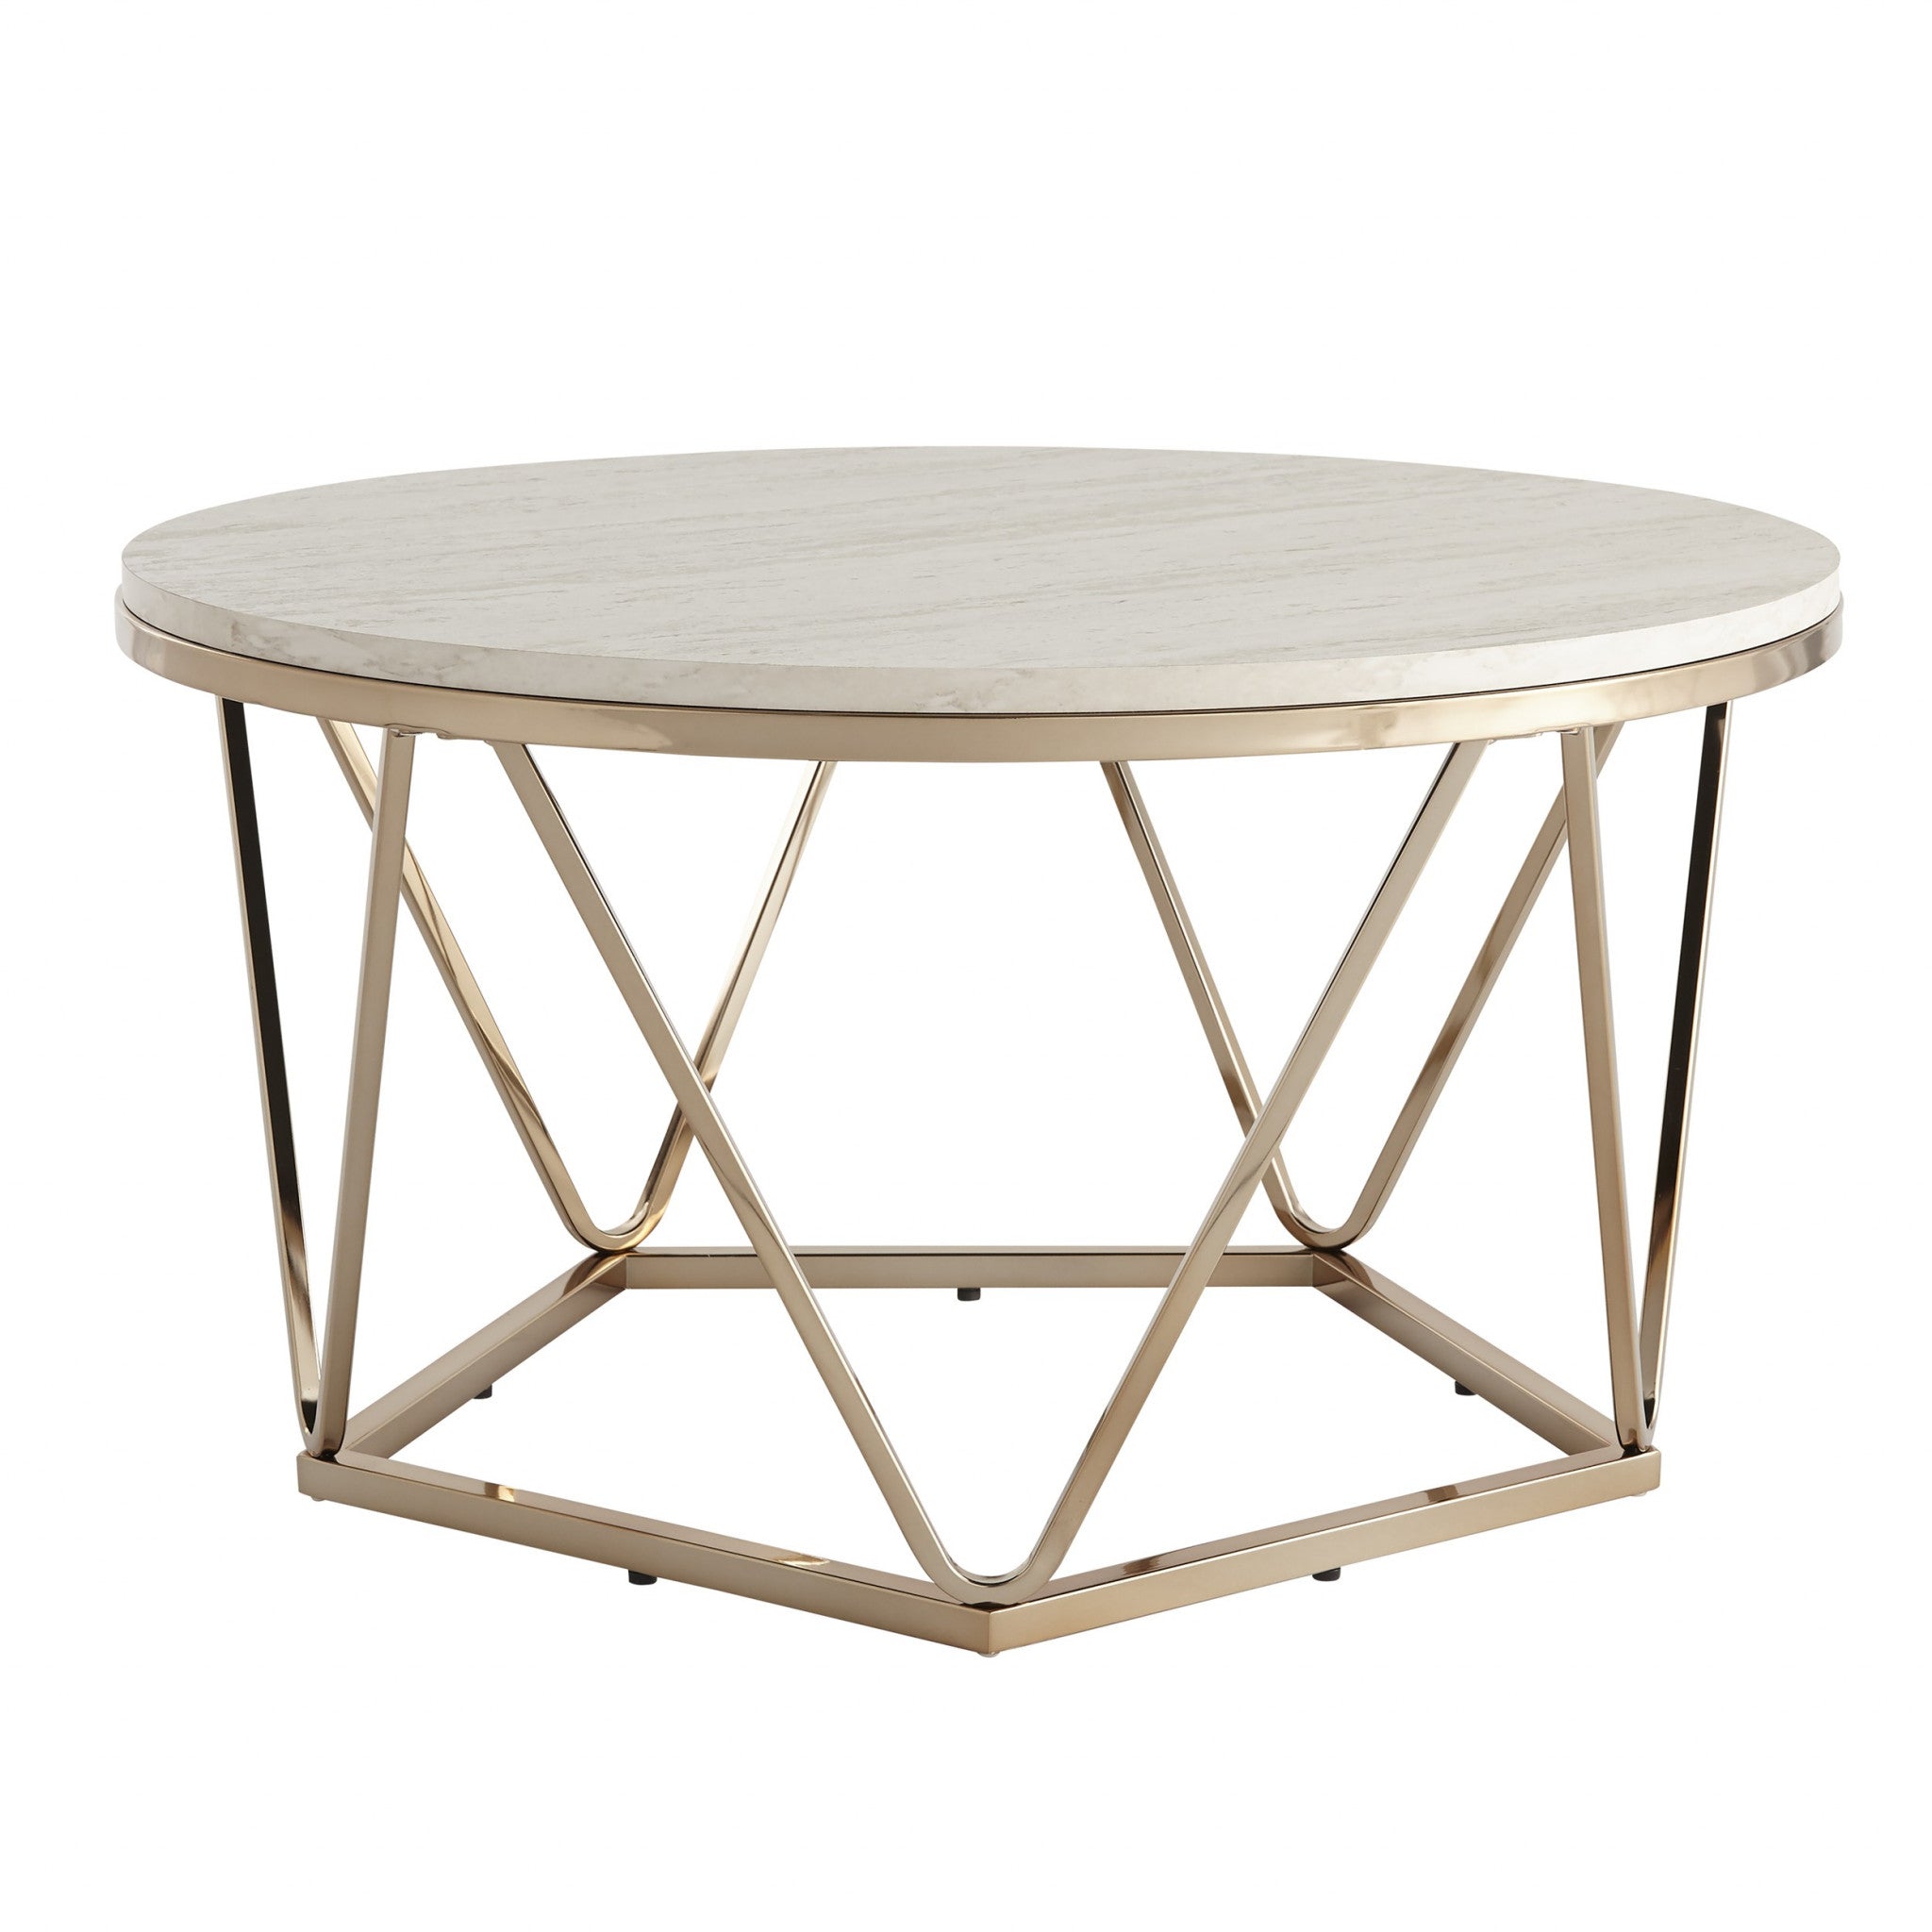 33" Champagne Solid Manufactured Wood And Metal Round Coffee Table